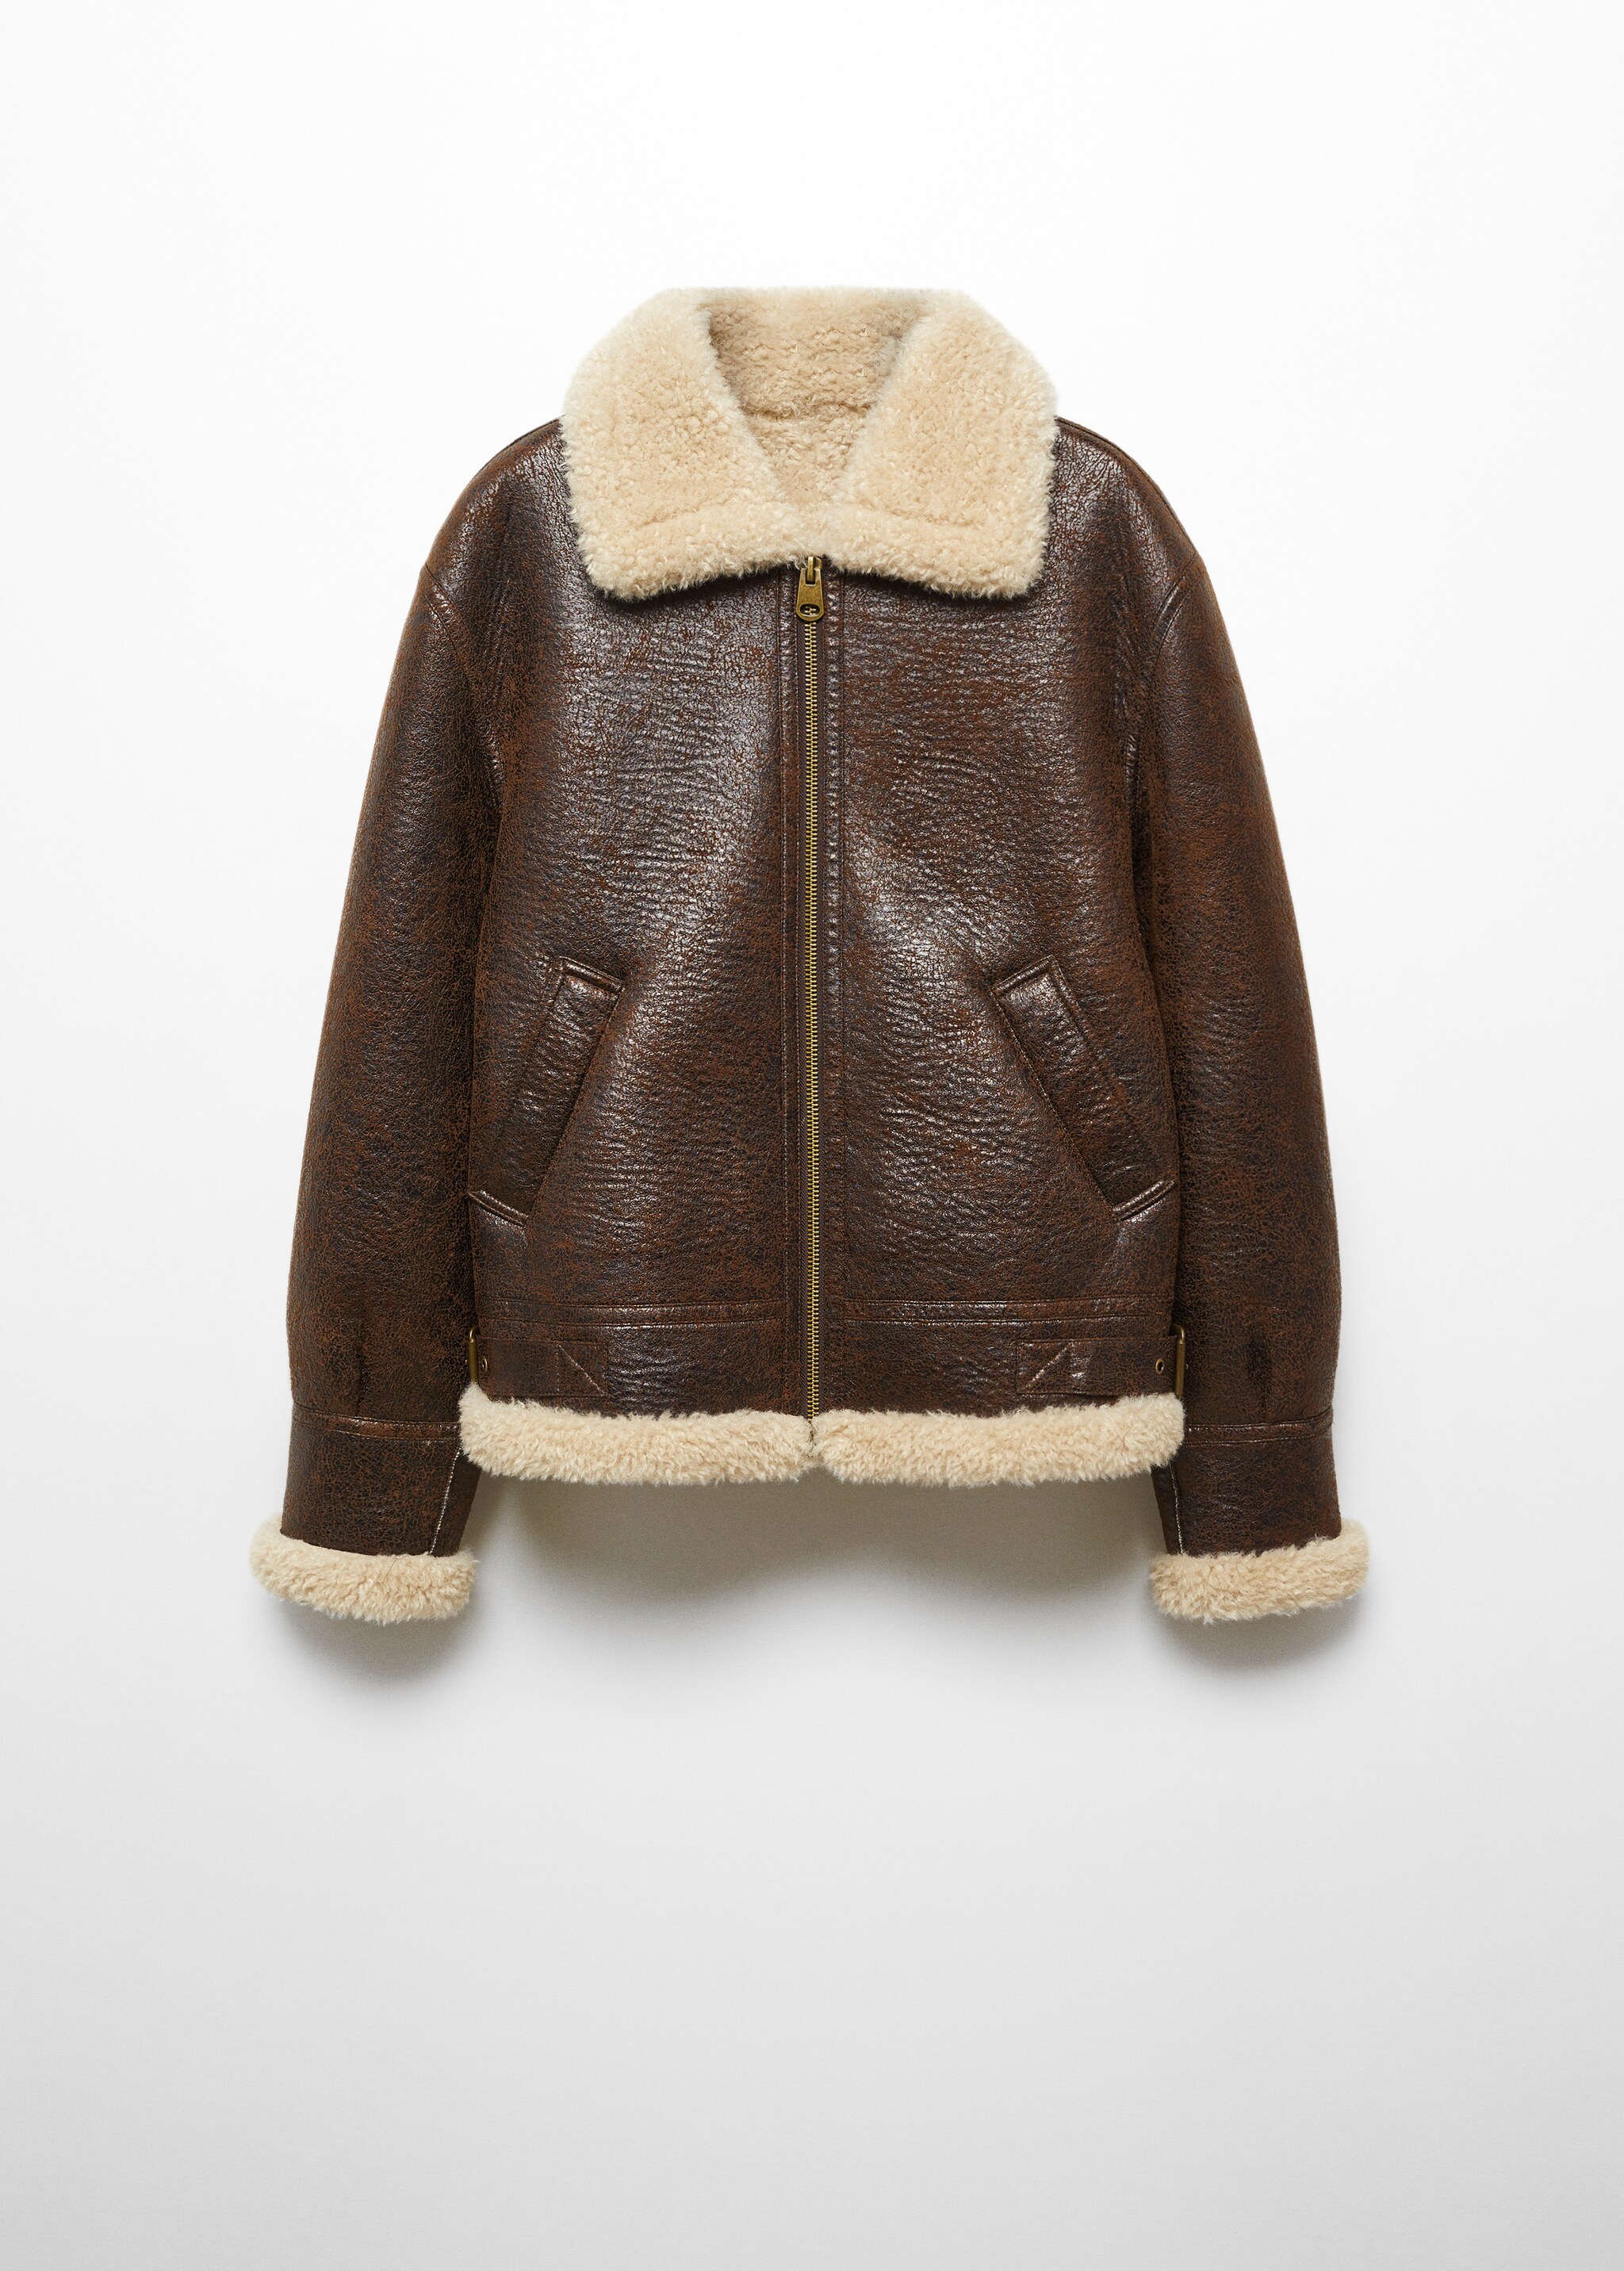 Vintage-effect shearling jacket - Article without model